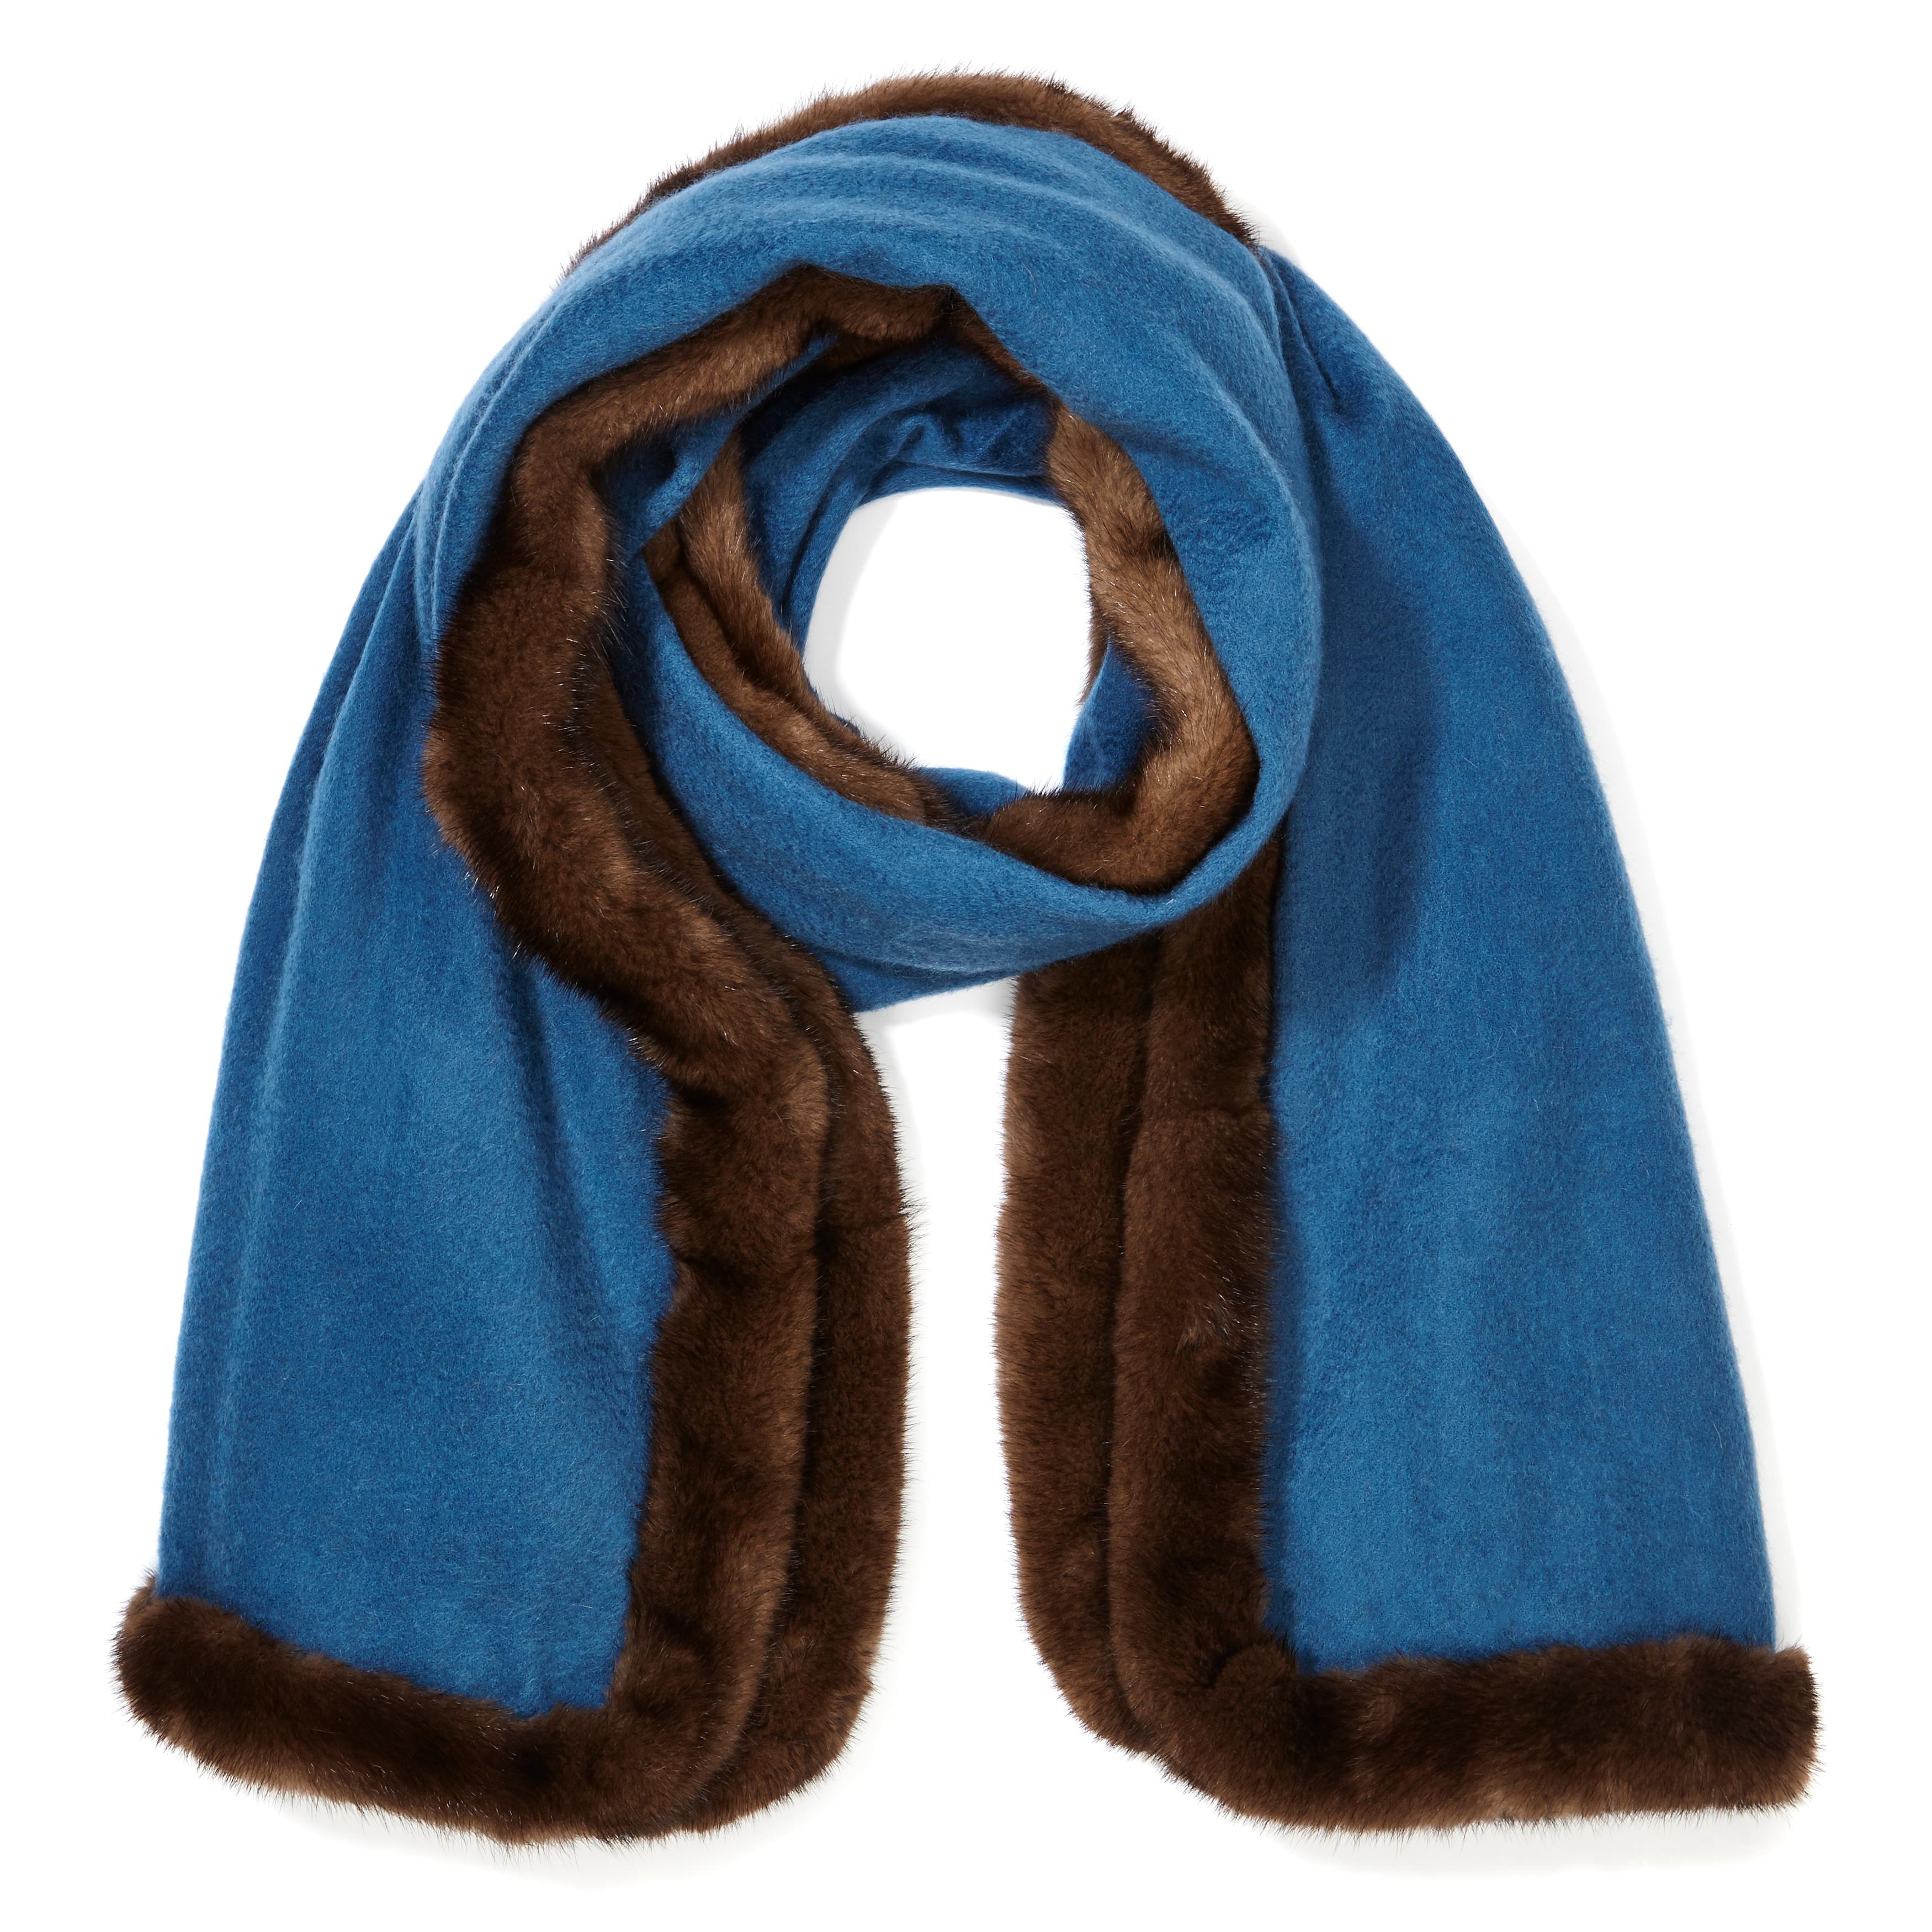 The perfect Christmas Gift for someone special - monogramming available on request. 

Verheyen London’s shawl is spun from the finest Scottish woven cashmere and finished with the most exquisite dyed mink. Its warmth envelopes you with luxury,